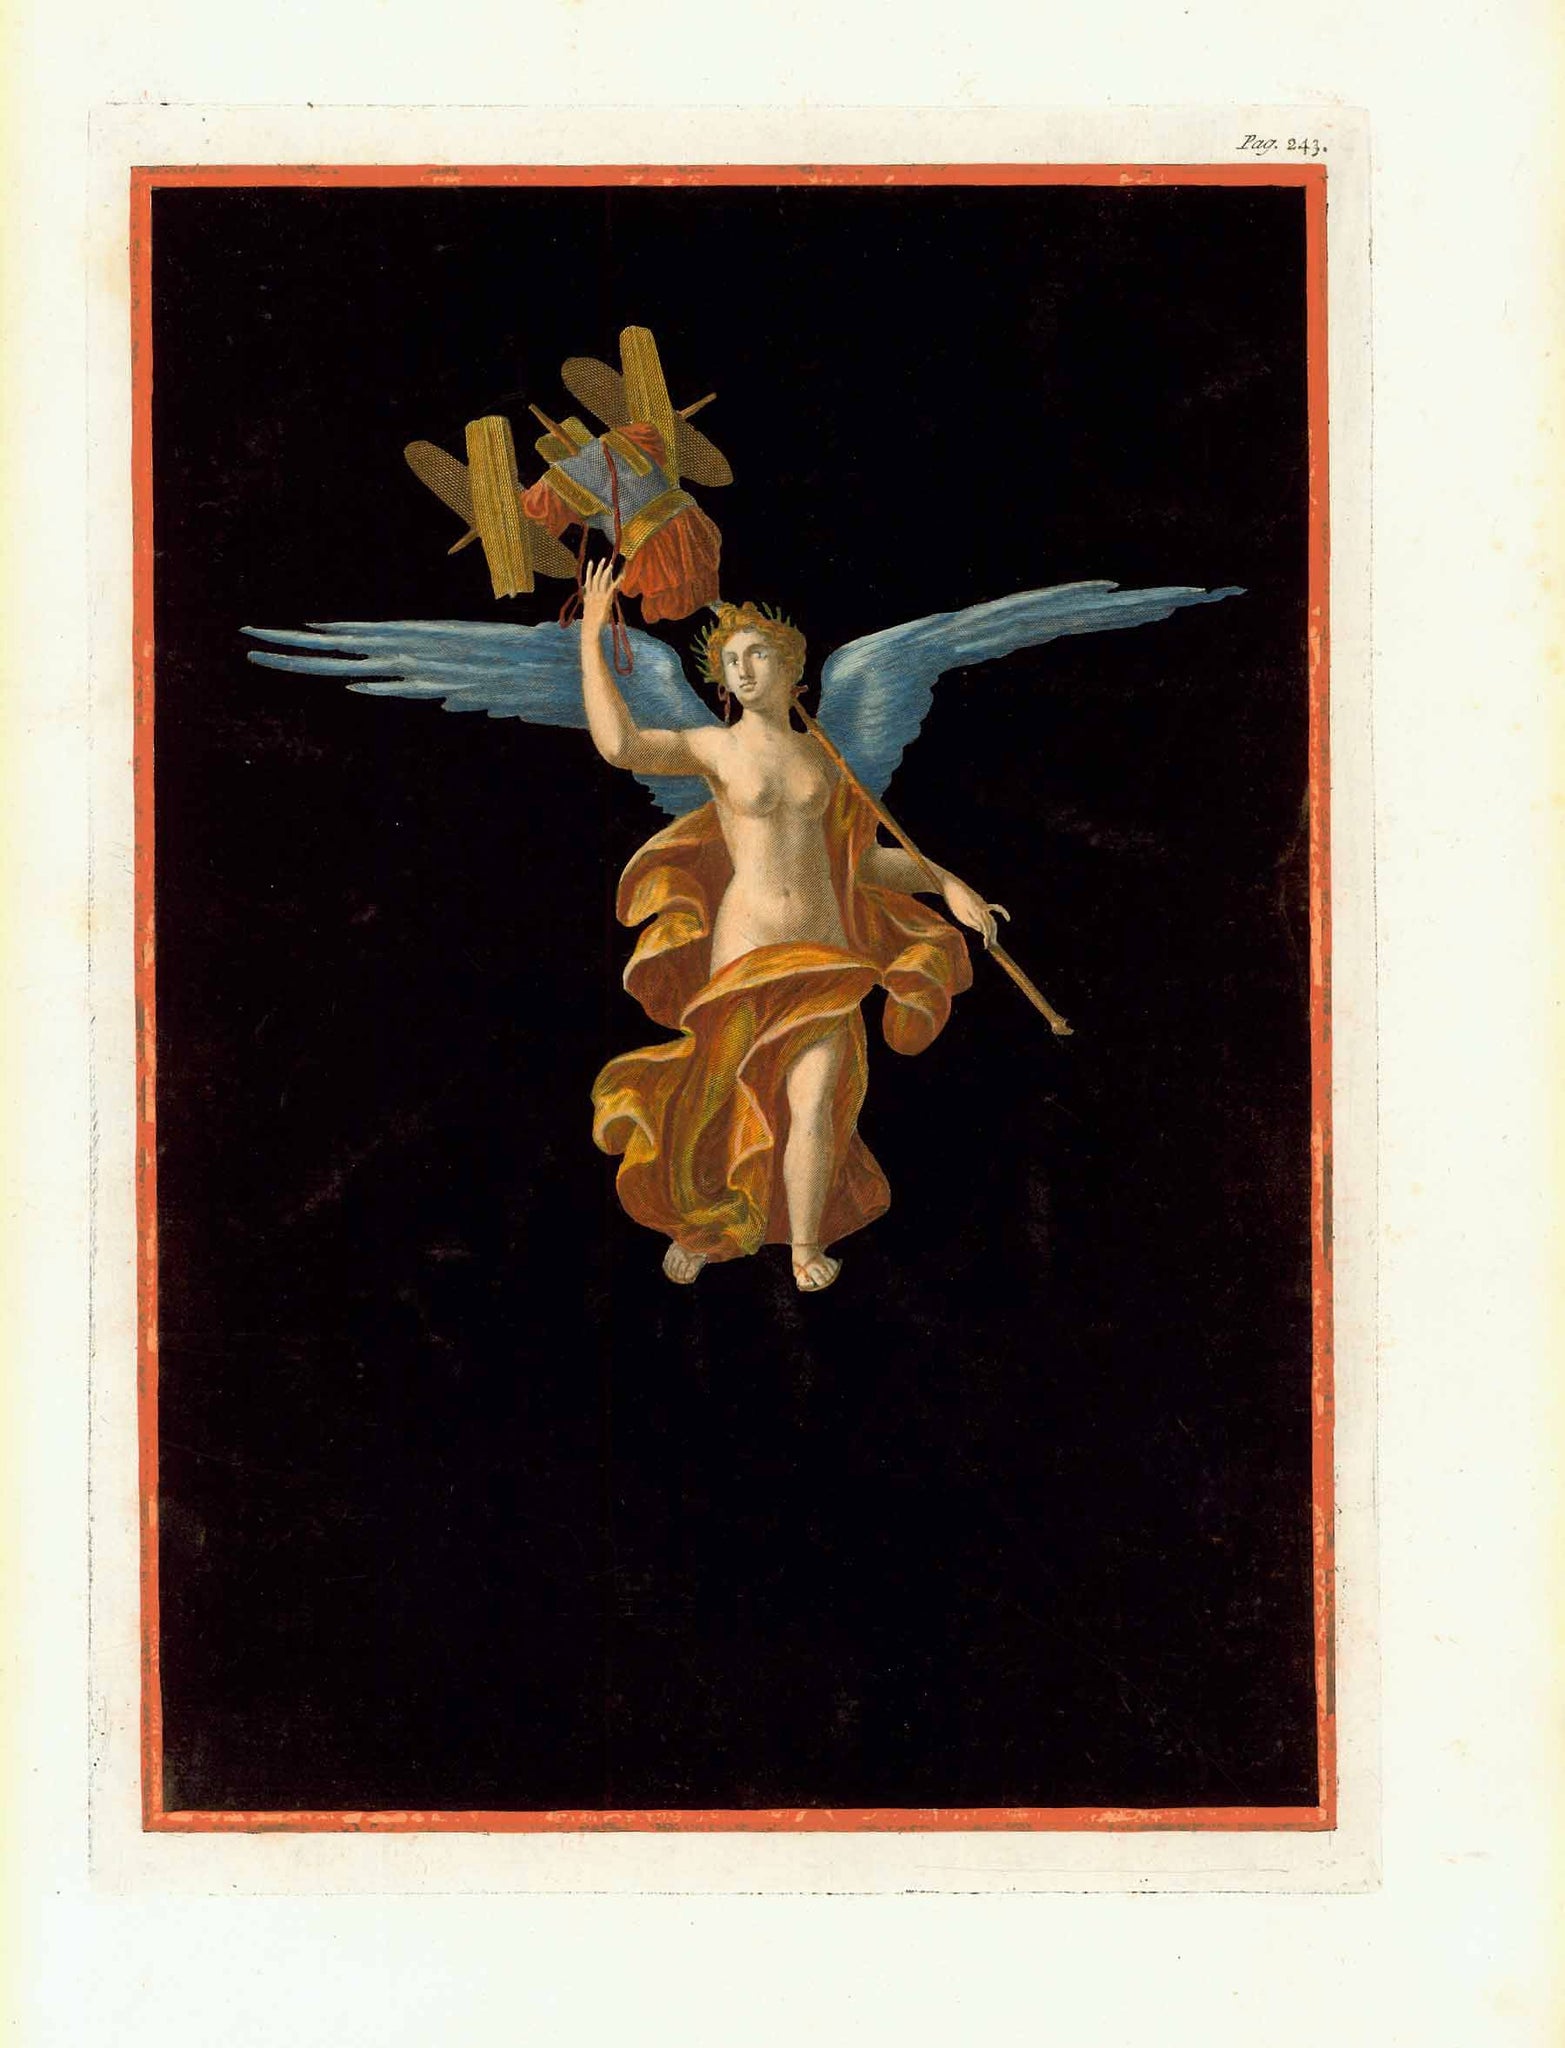 No title. - "Angel"  Wall fresco in Herculaneum  Anonymous hand-colored (gouache) copper etching. Page 243  Published in "Le Antichita di Ercolano esposte"  An 8-volume work on the antiquities found during the excavations of Herculaneum.  Naples, 1757-1792